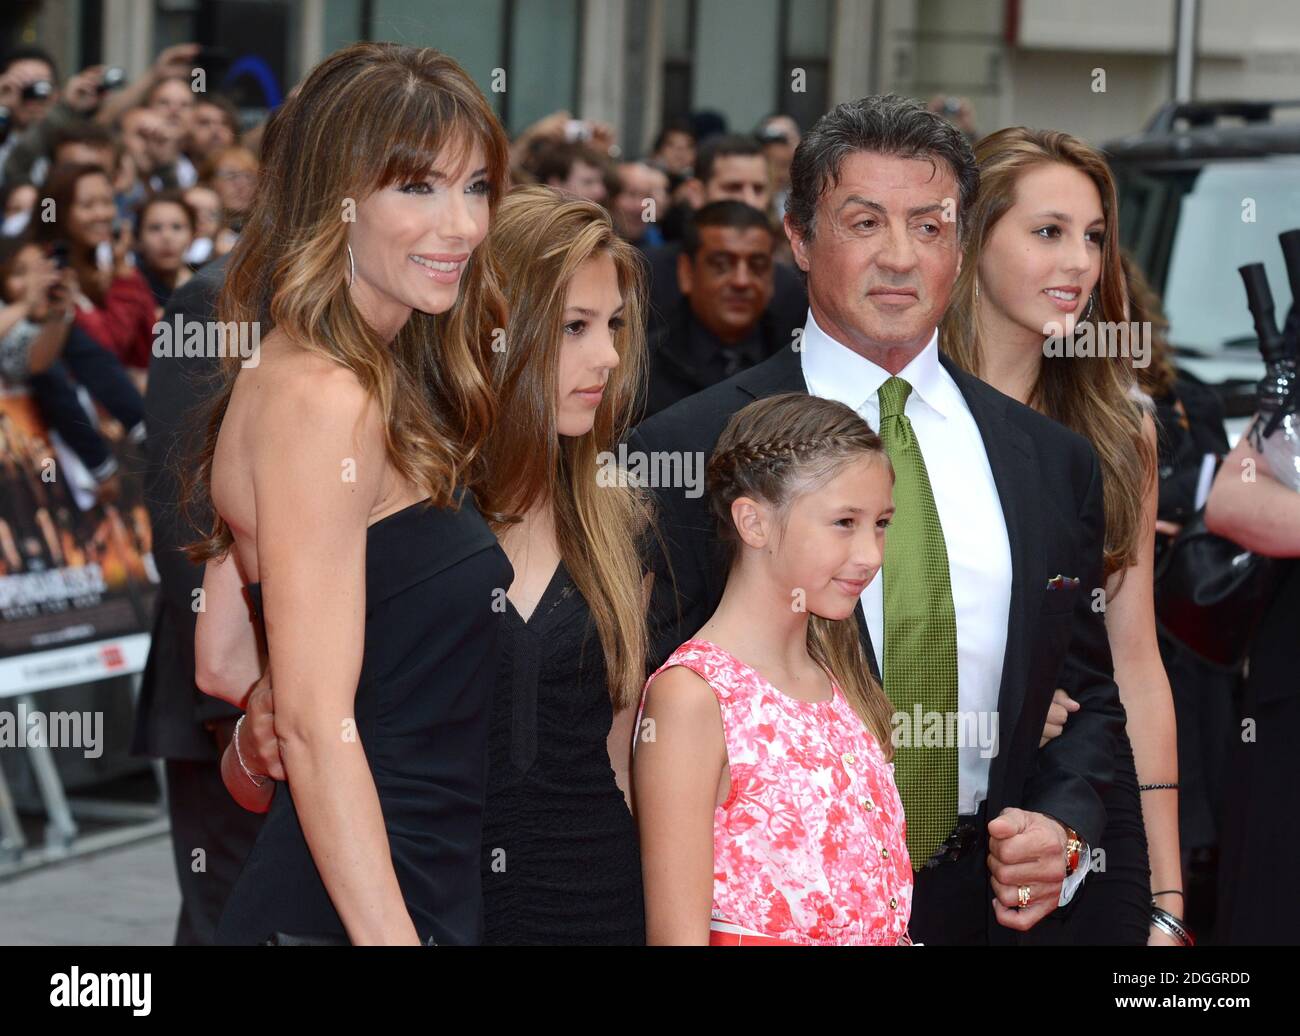 Meet Sylvester Stallone's Daughters With Jennifer Flavin